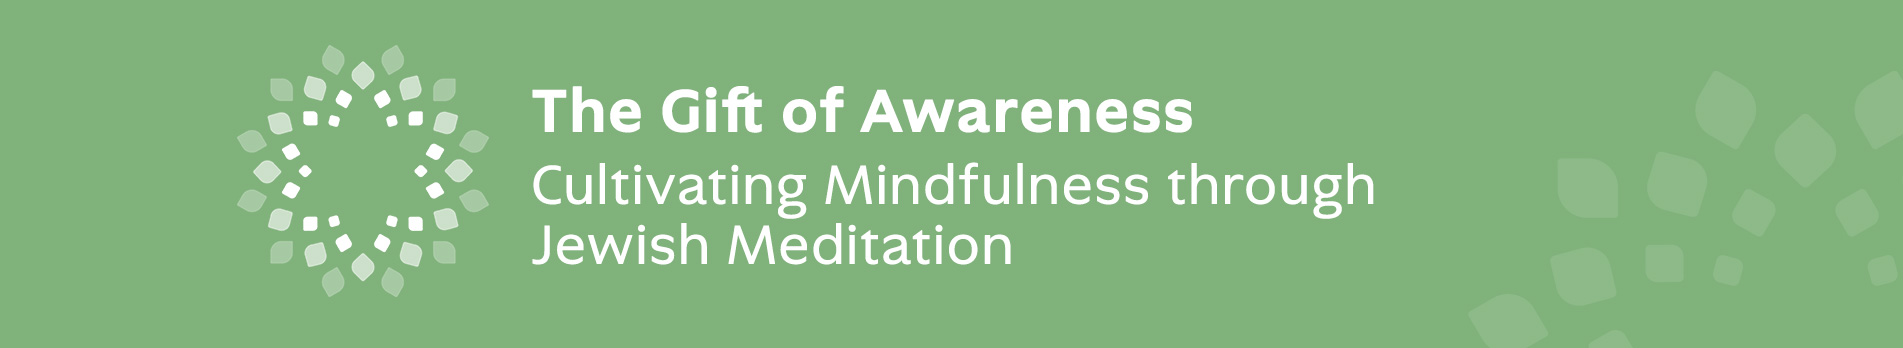 The Gift of Awareness: Cultivating Mindfulness through Jewish Meditation